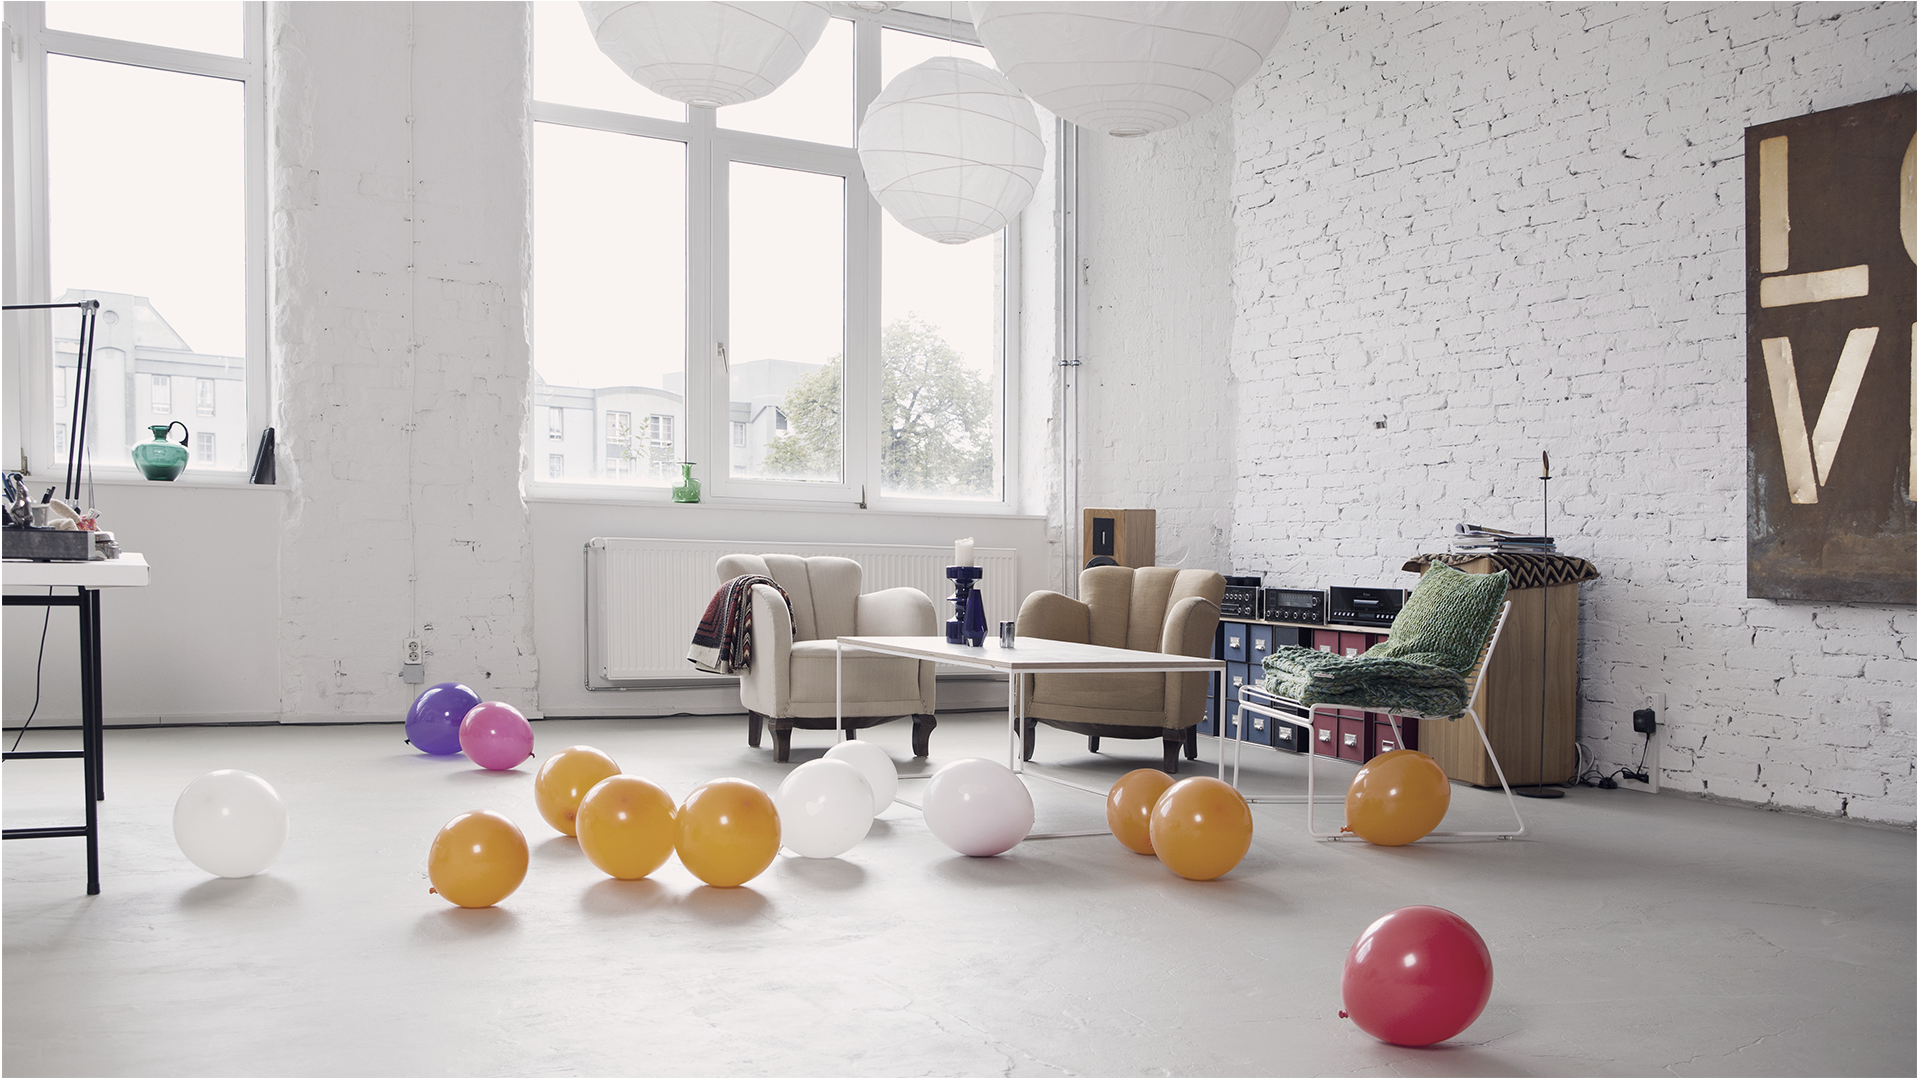 An empty room with balloons on the floor